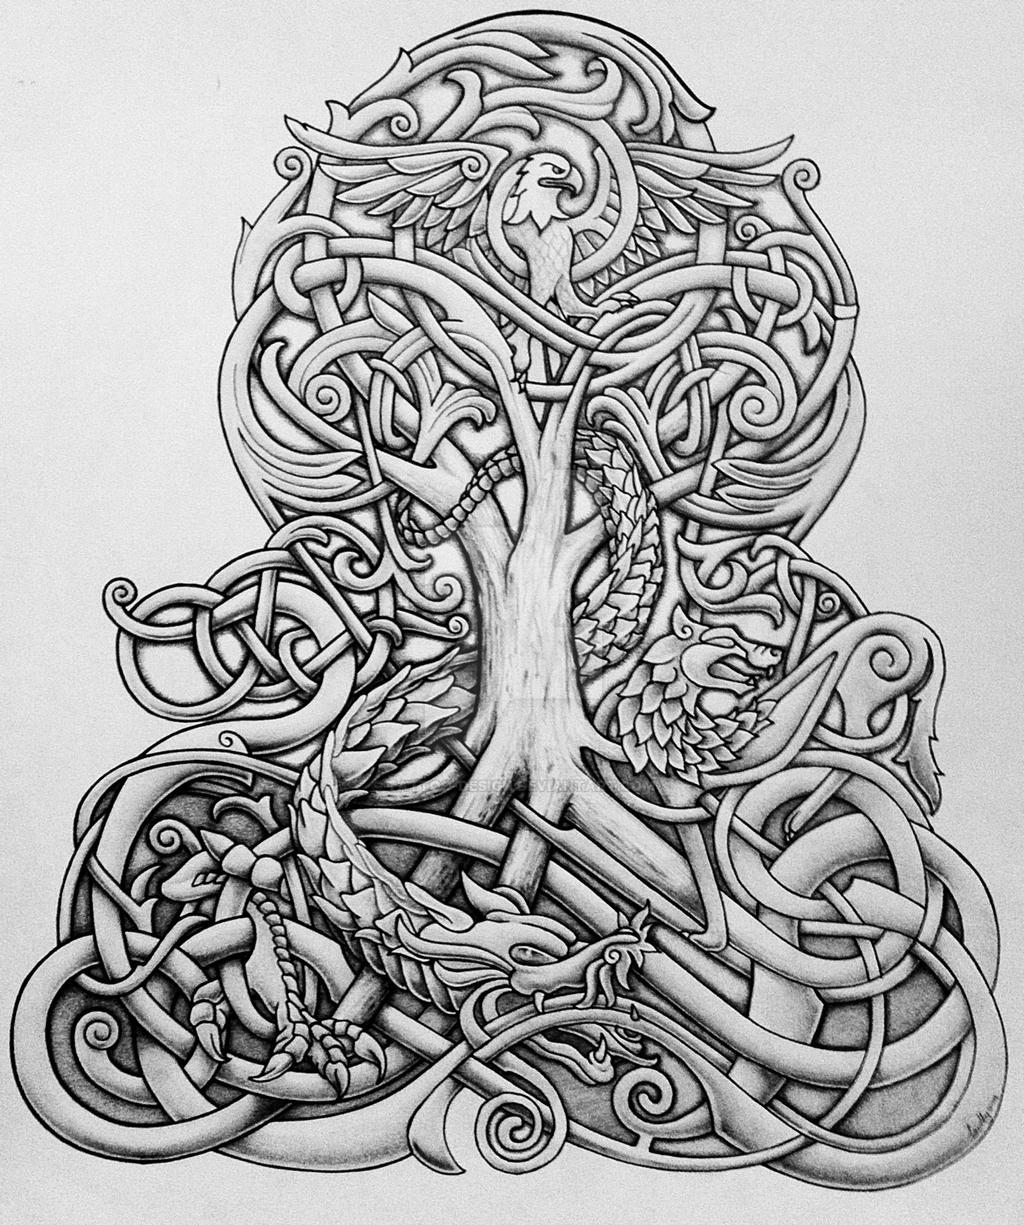 Yggdrasil and Dragon by Tattoo-Design on DeviantArt